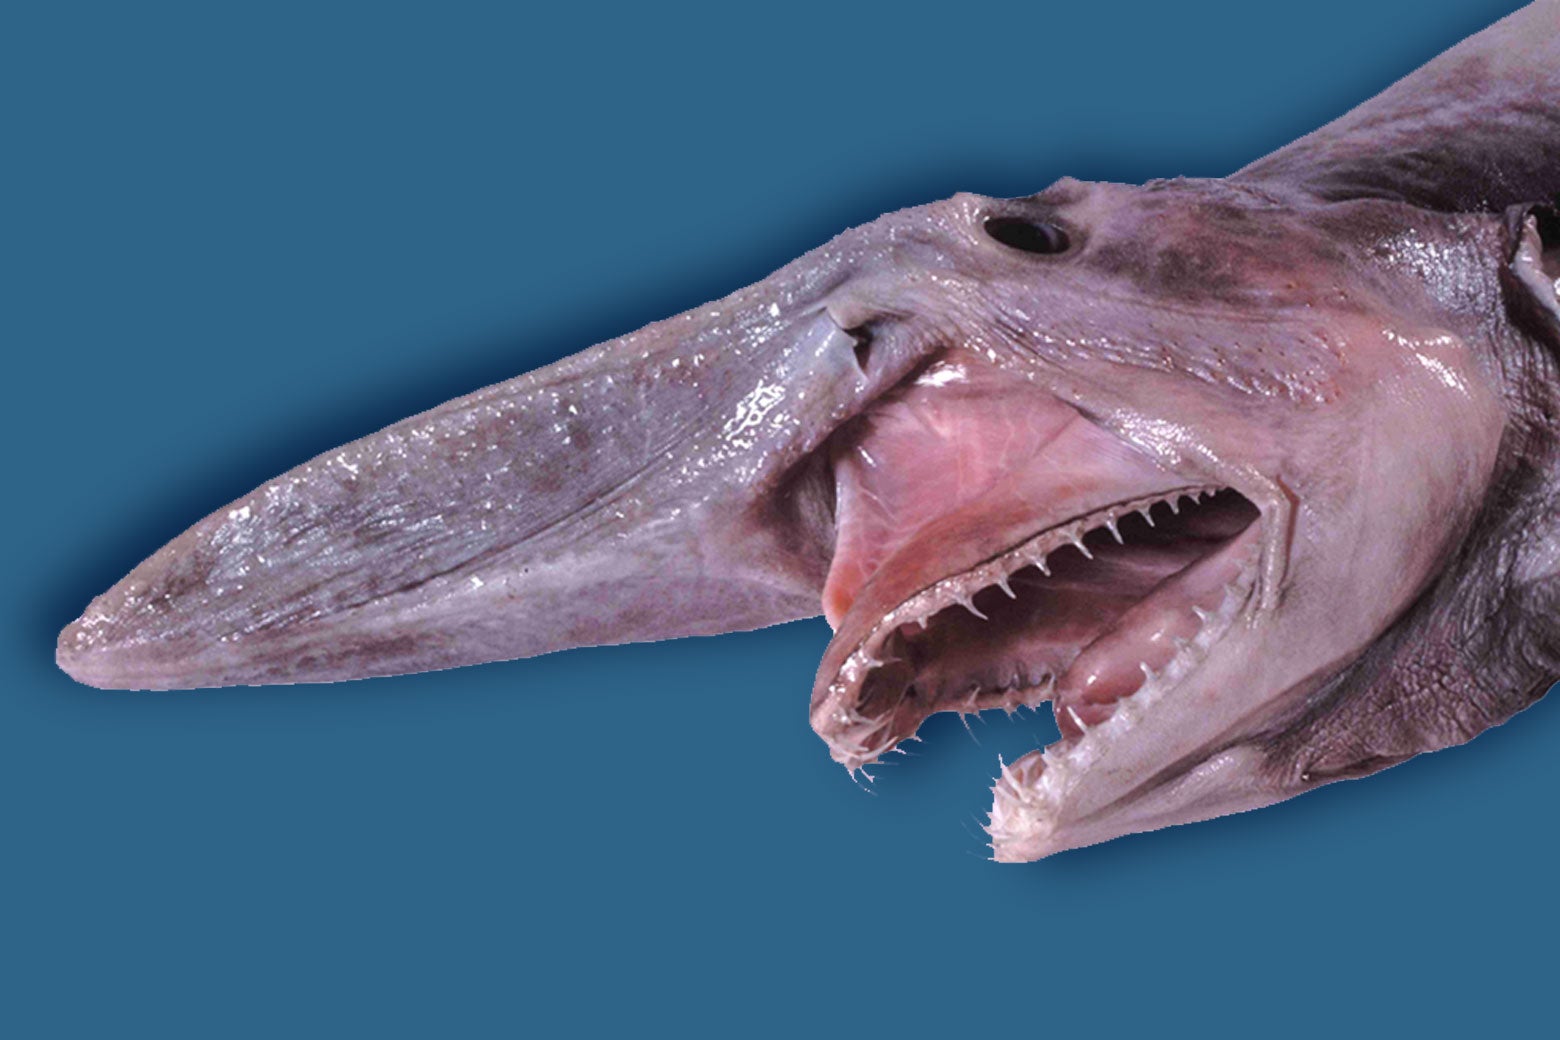 A skinny shark with a long flat snout and horrifying fleshy gum.